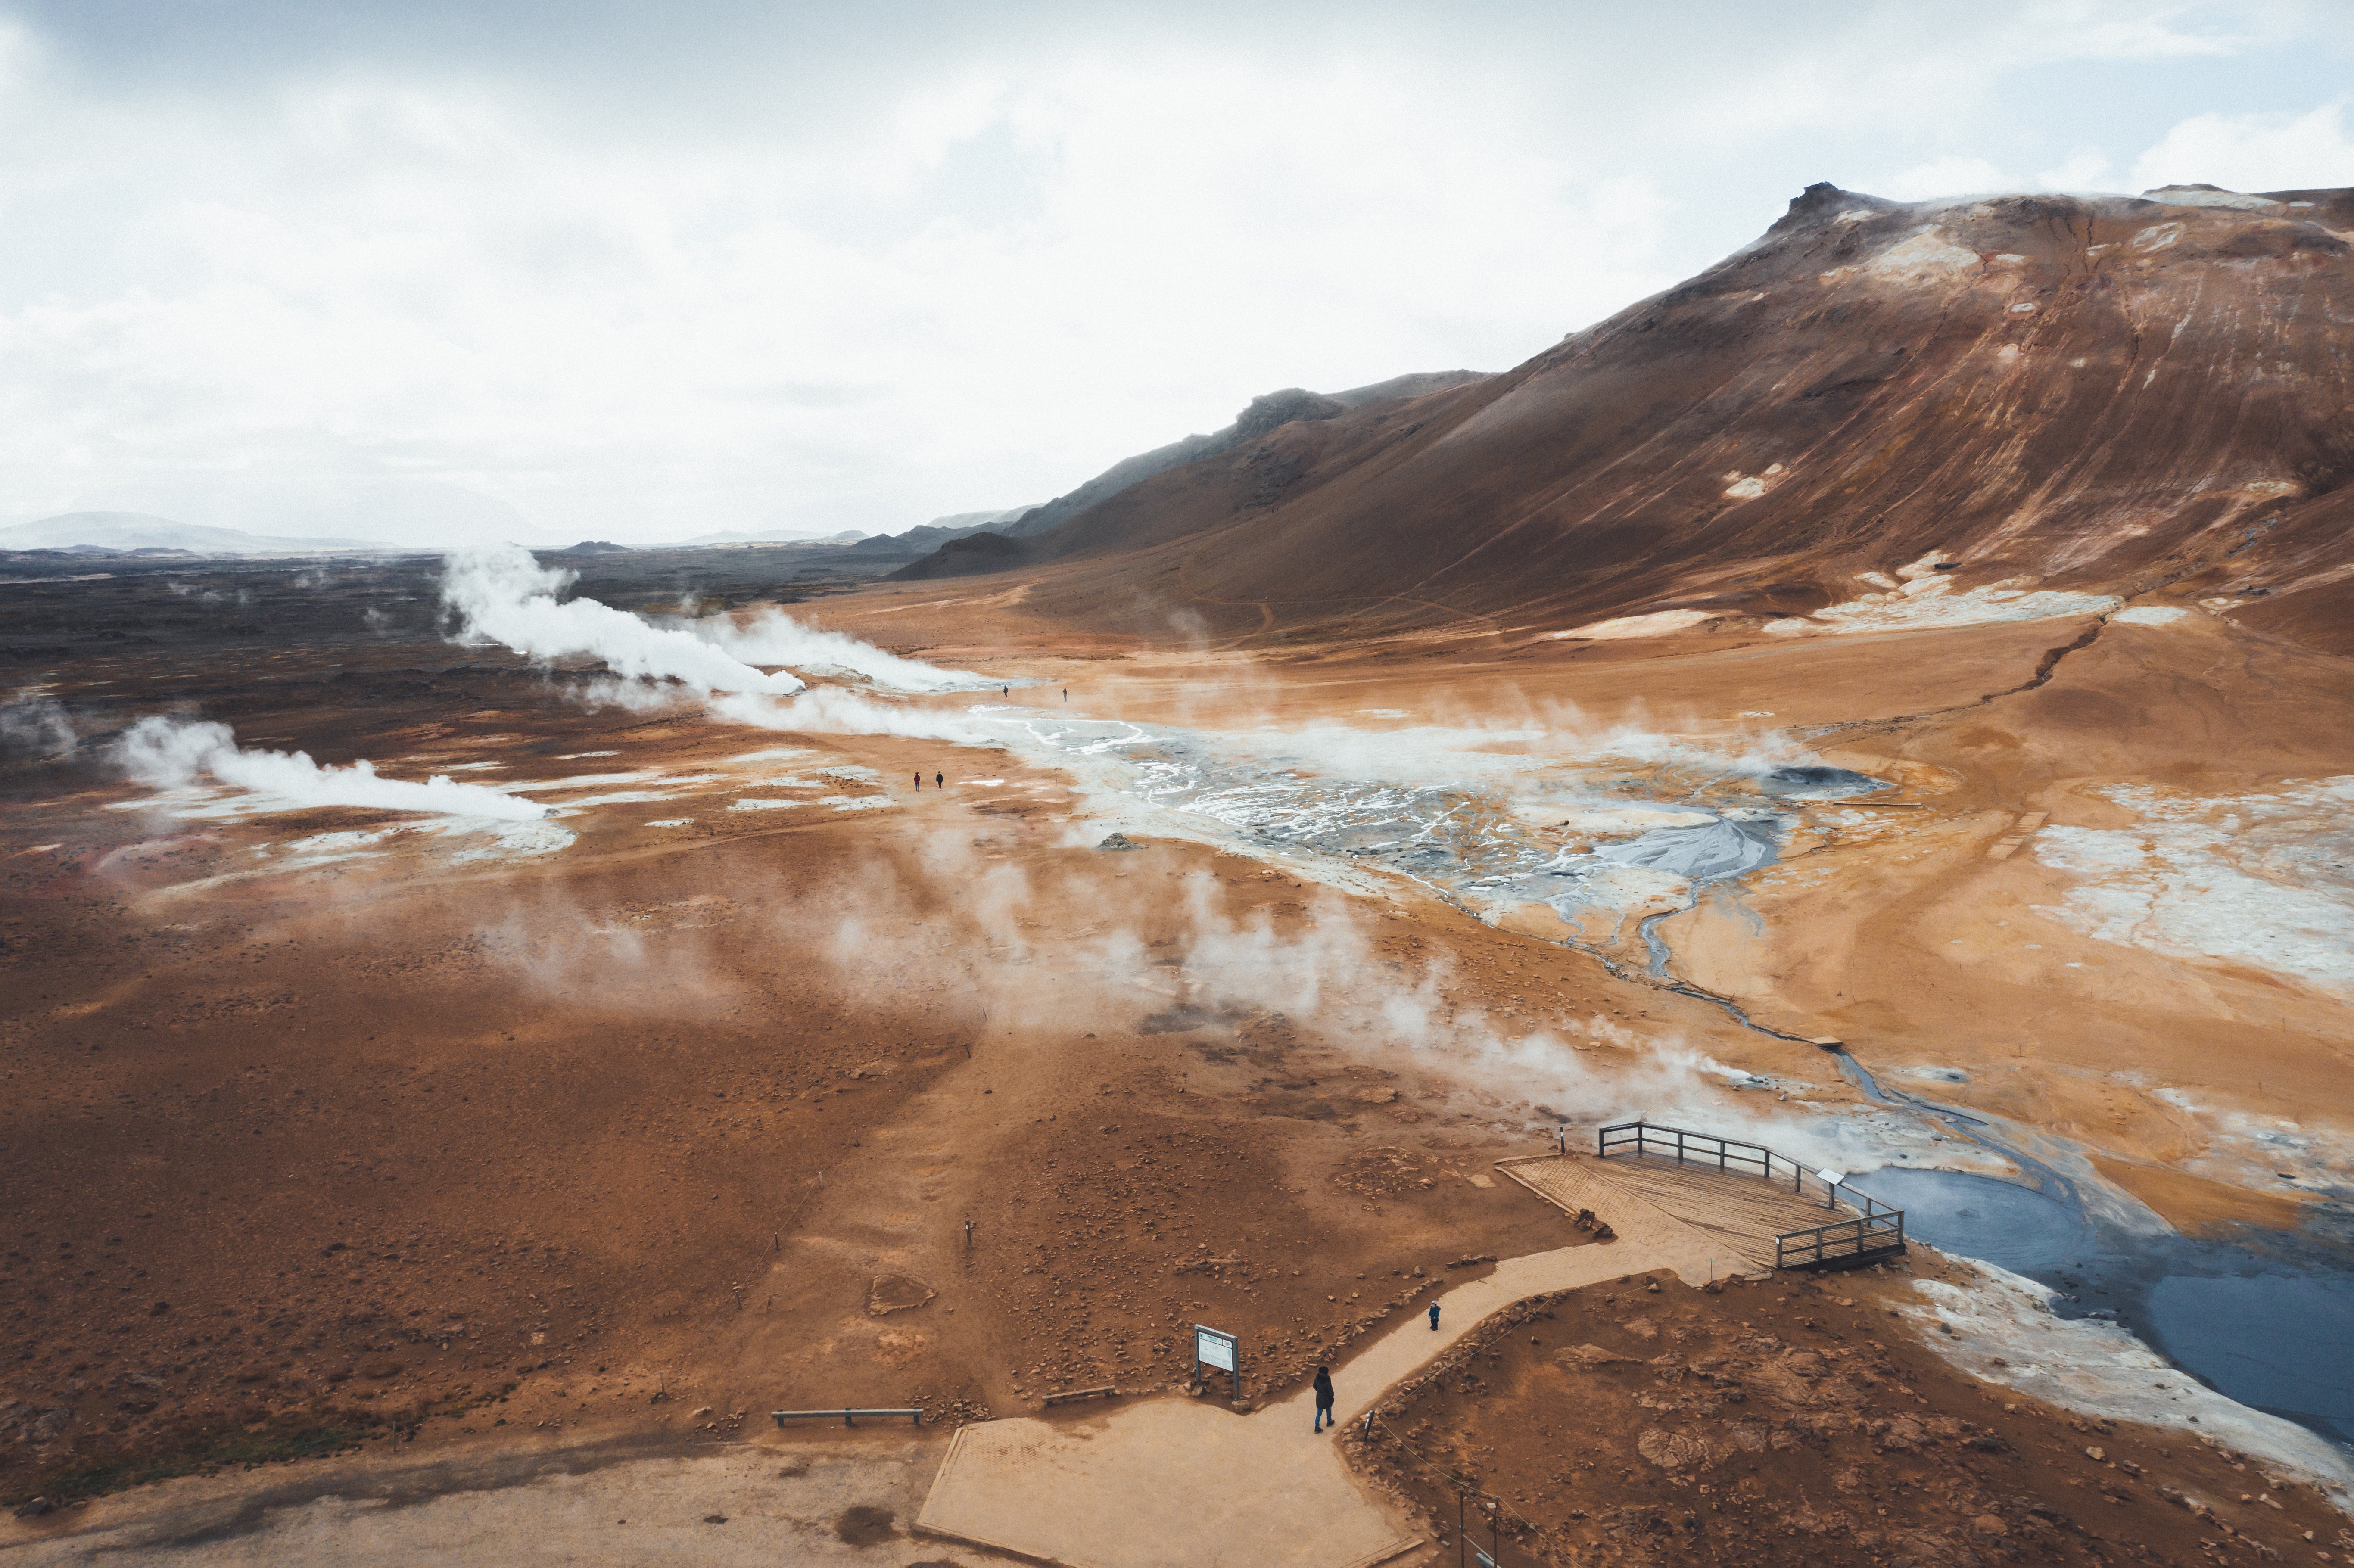 In the geothermal area of Hverir you’ll find an ochre-hued plain with bubbling mud pots